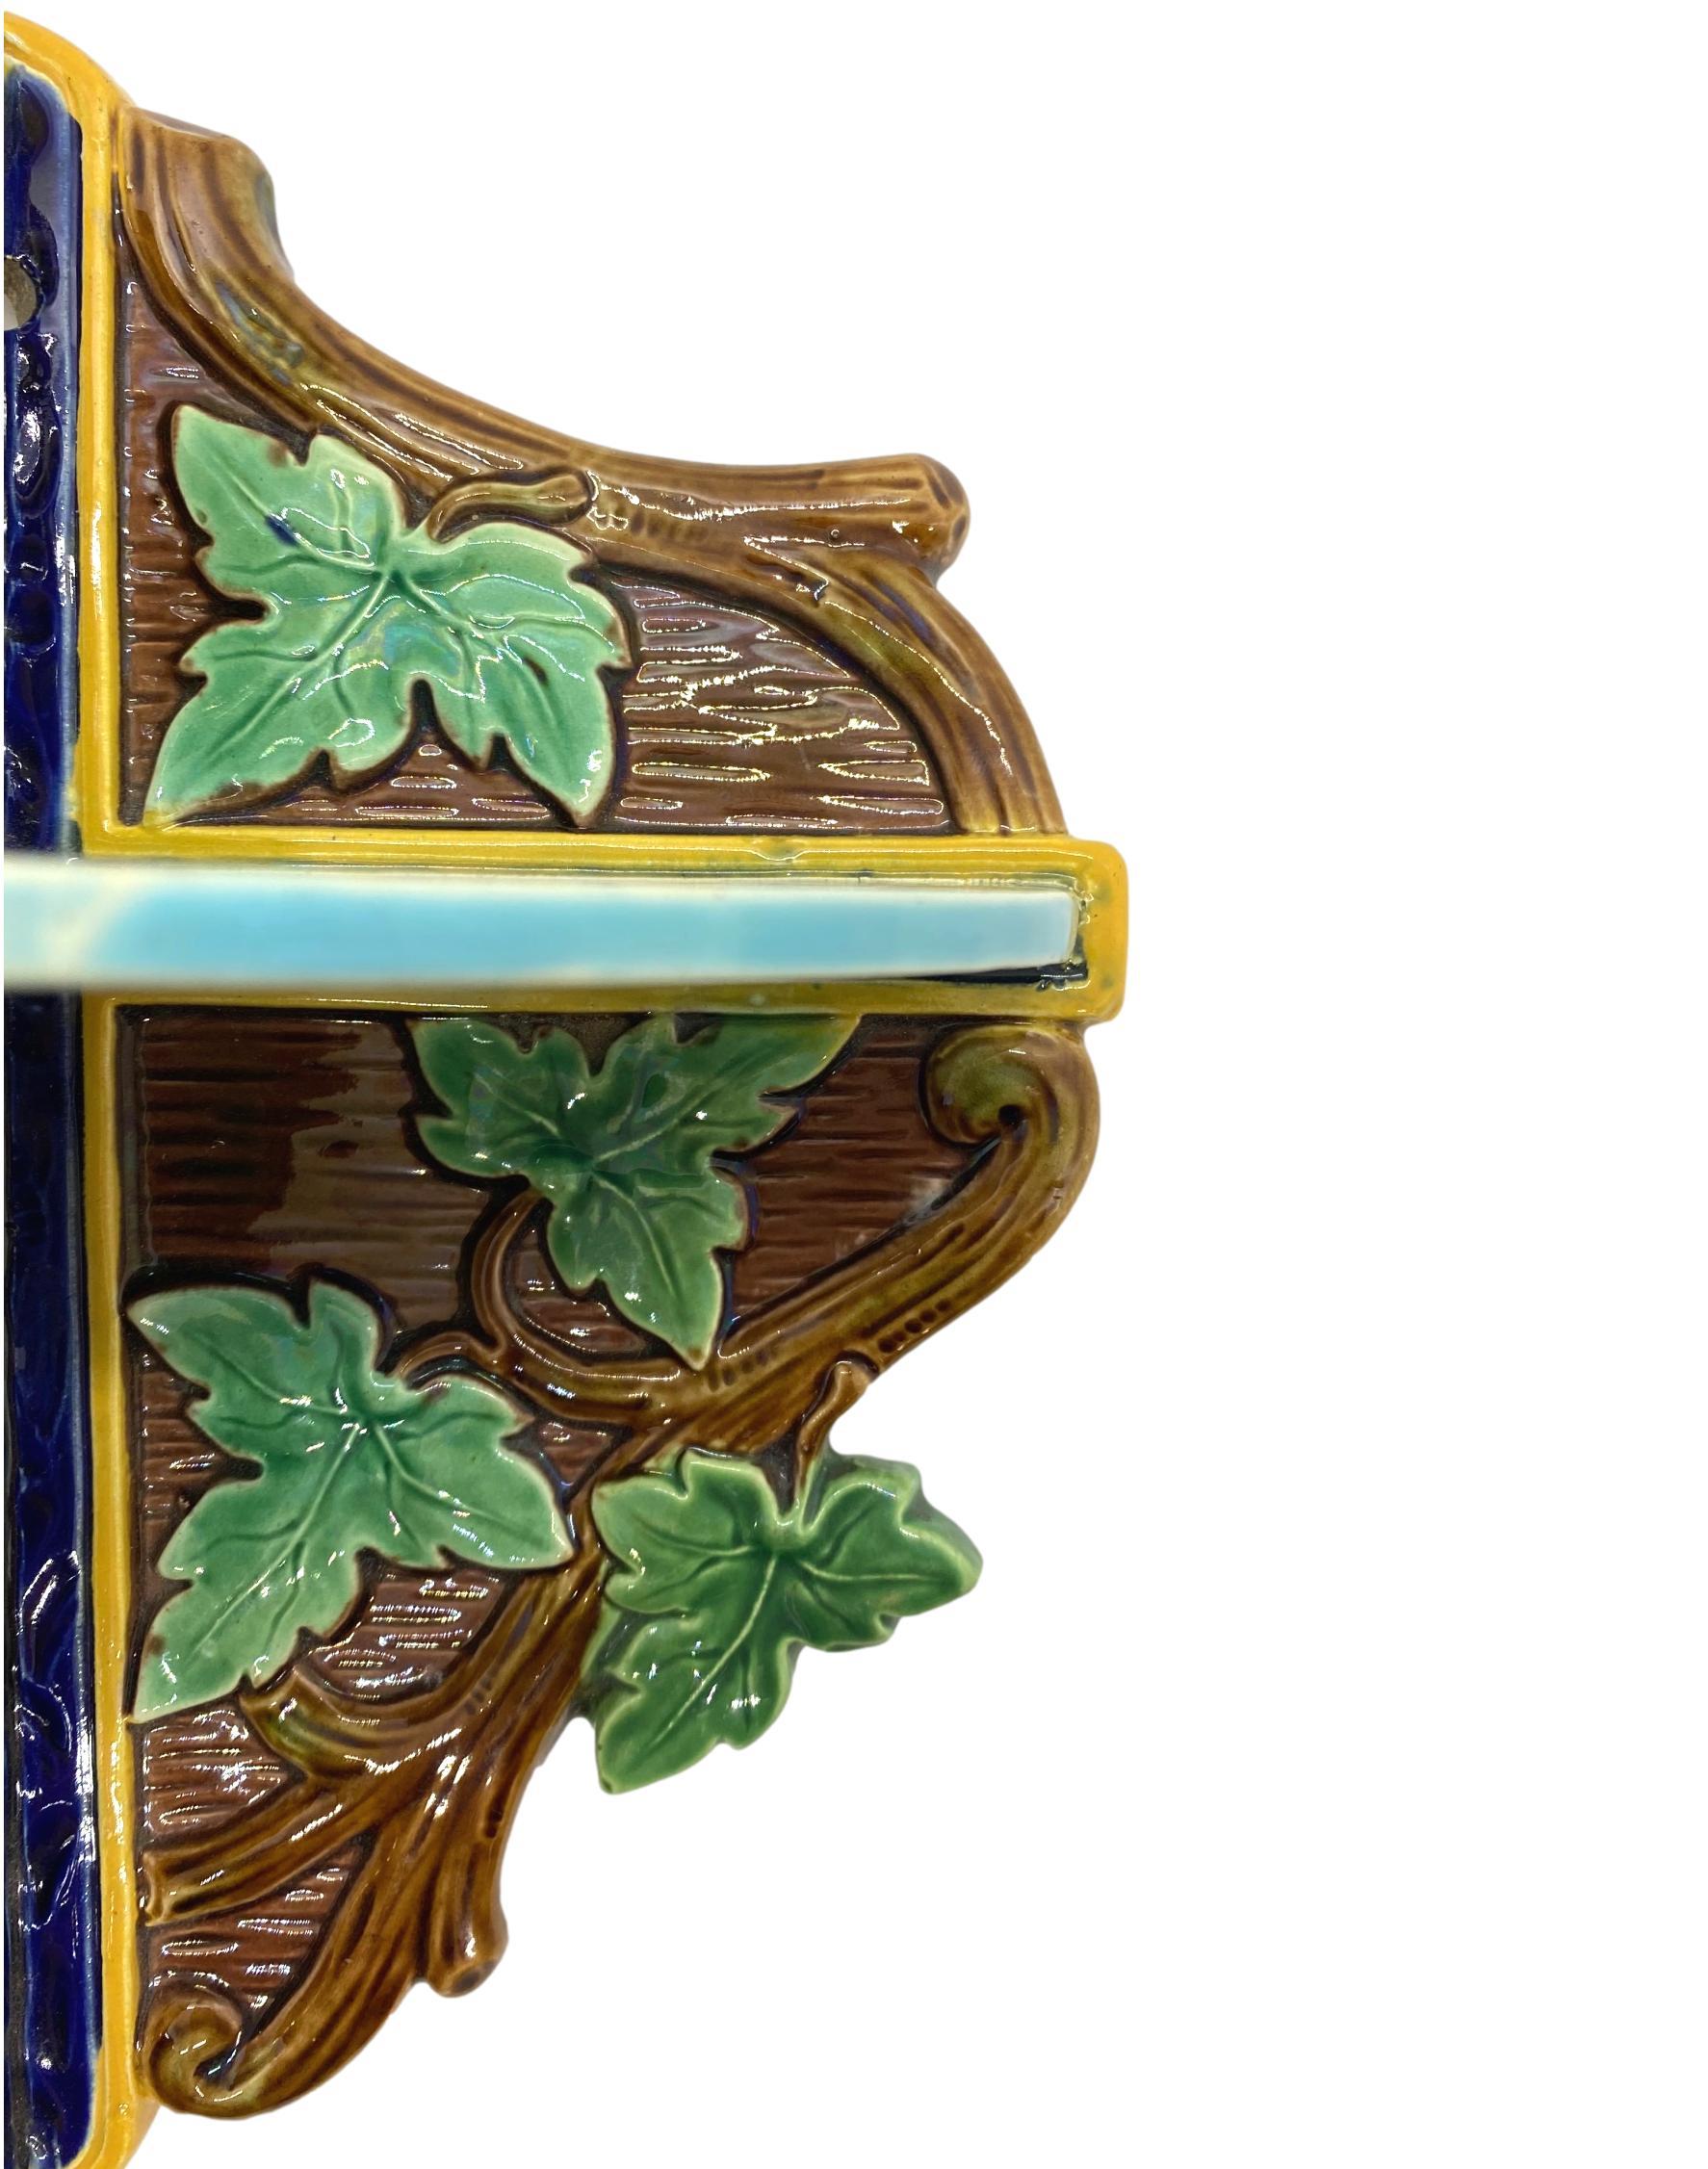 Majolica small-form corner shelf by T.C. Brown-Westhead, Moore & Co. Naturalistically molded as green-glazed ivy leaves, molded twigs on a bark ground, centrally fitted with a turquoise-glazed shelf, English, ca. 1877. 
For thirty years, we have